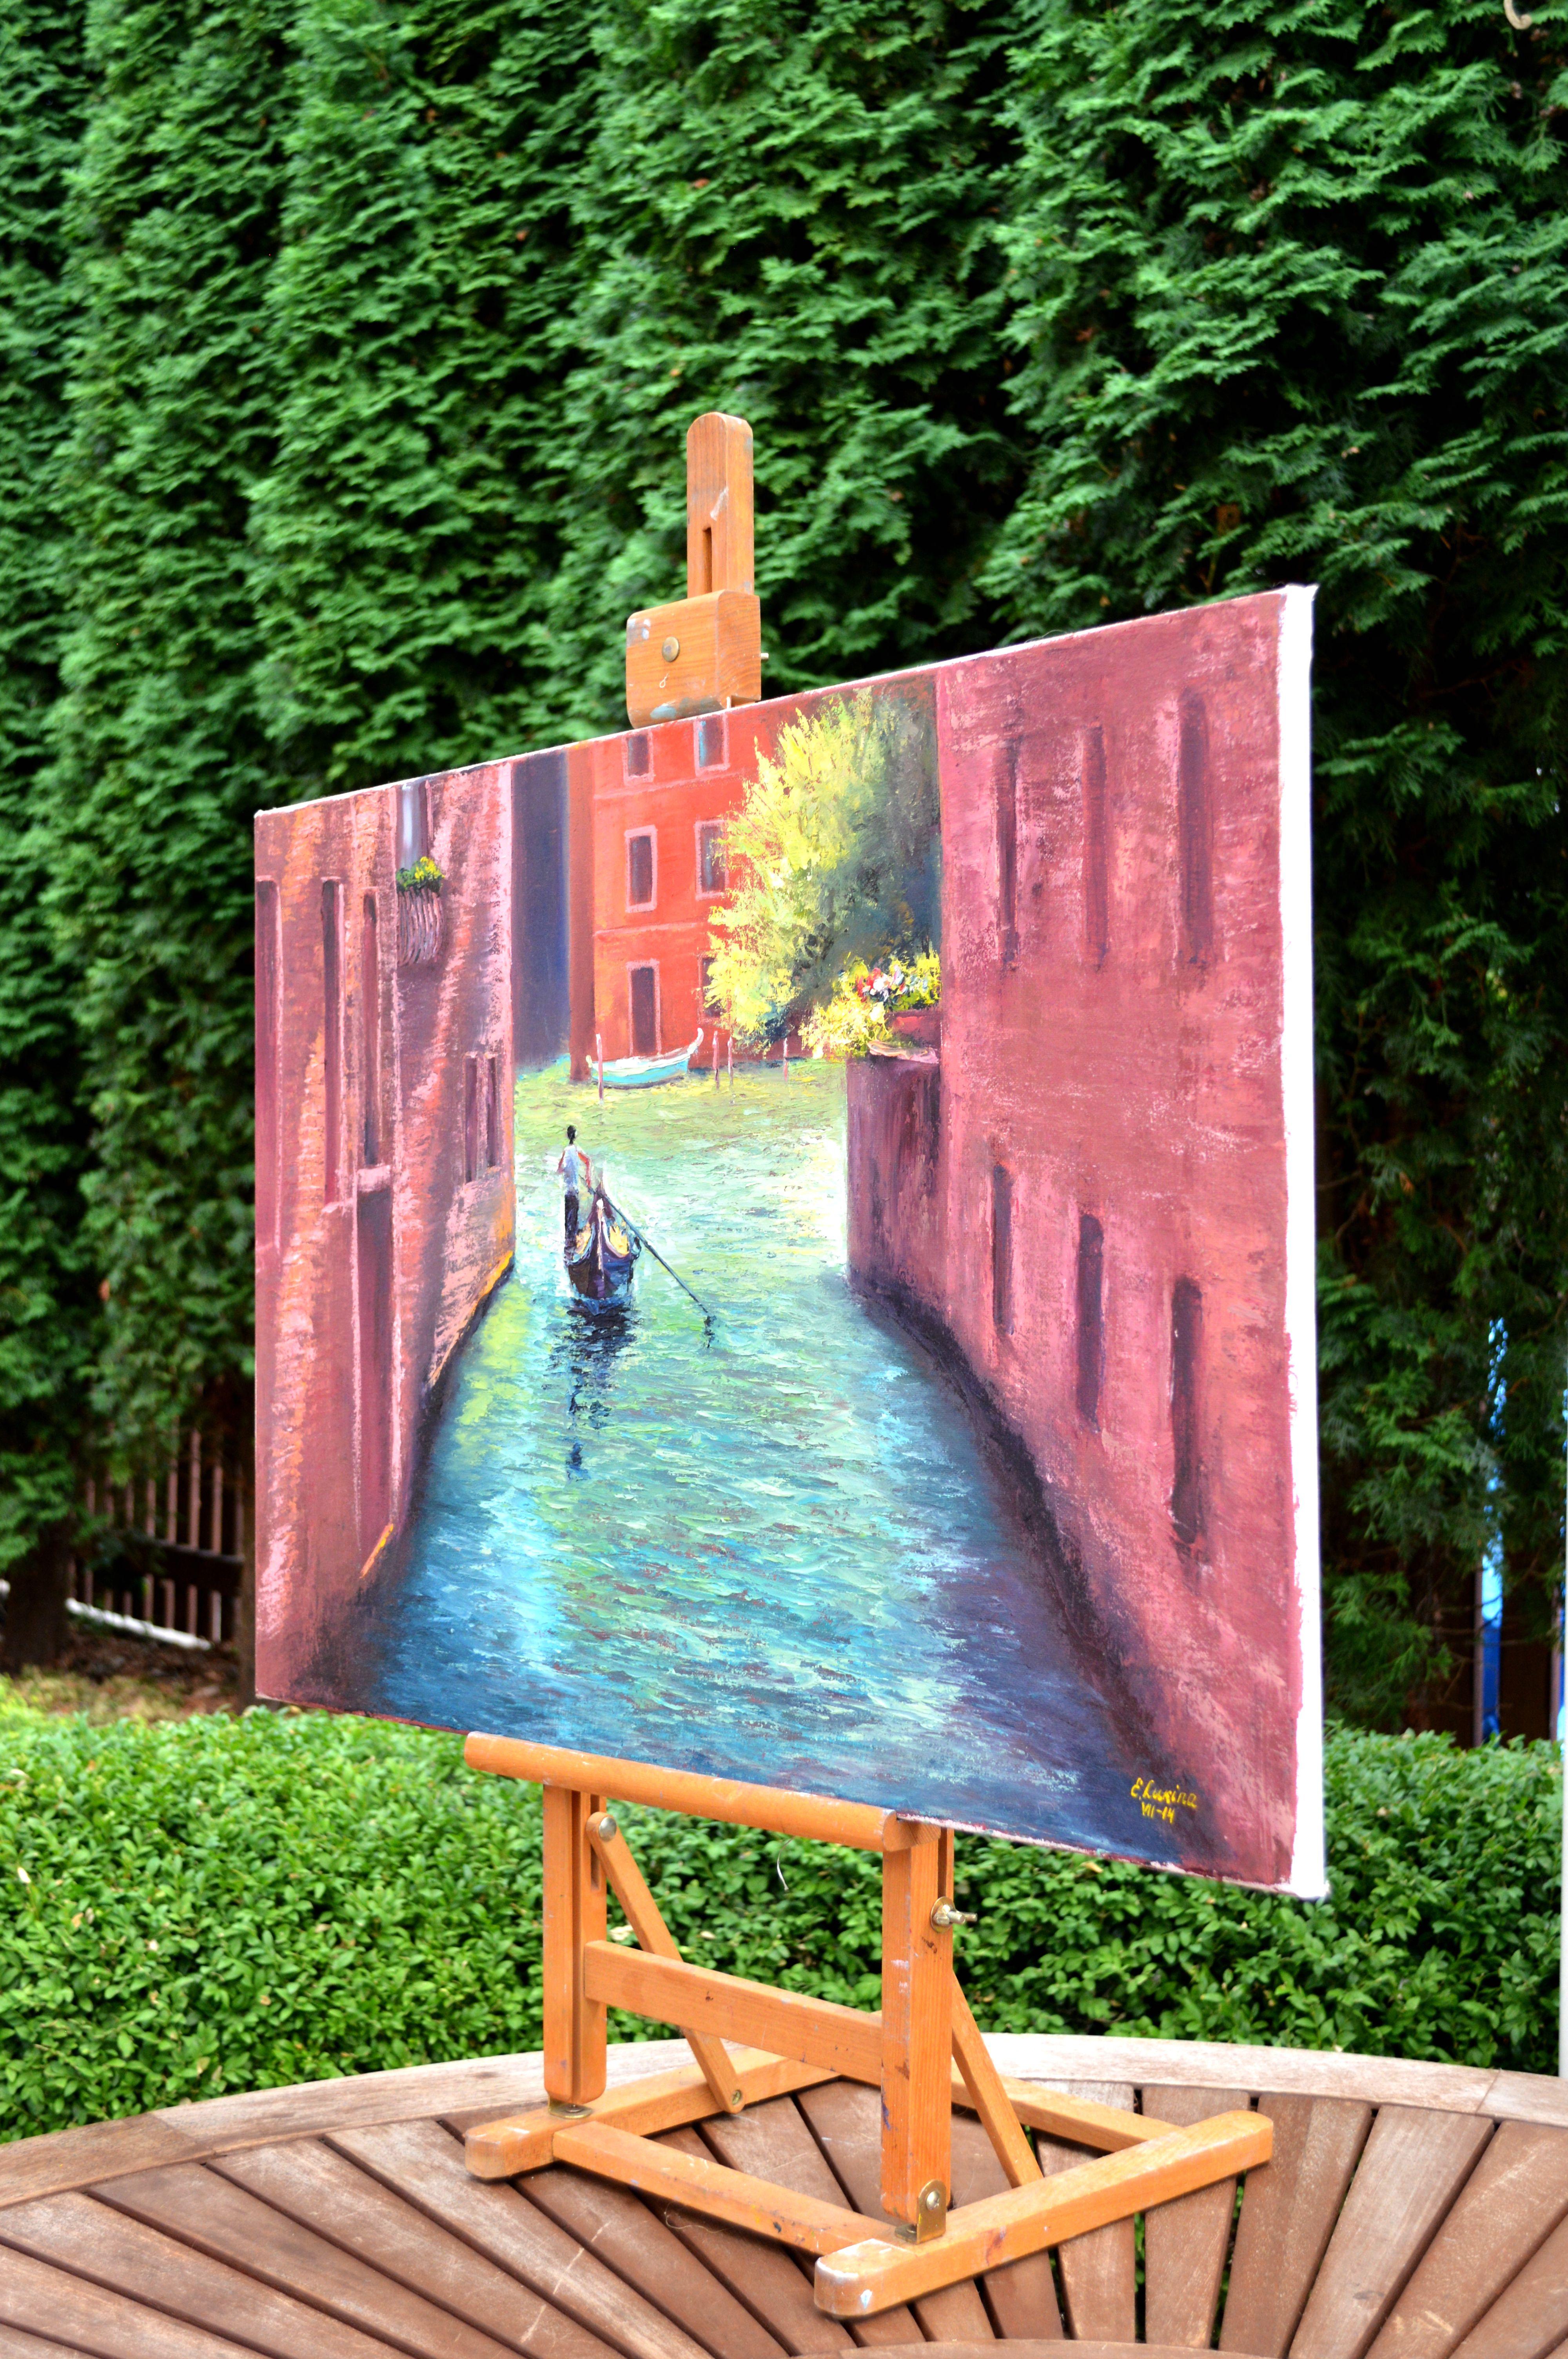 In this oil painting, I sought to capture the serene ambiance of a secluded waterway, embracing the vibrancy of the architecture that emerges brilliantly with each brushstroke. The lone gondolier symbolizes the journey through life's tranquil